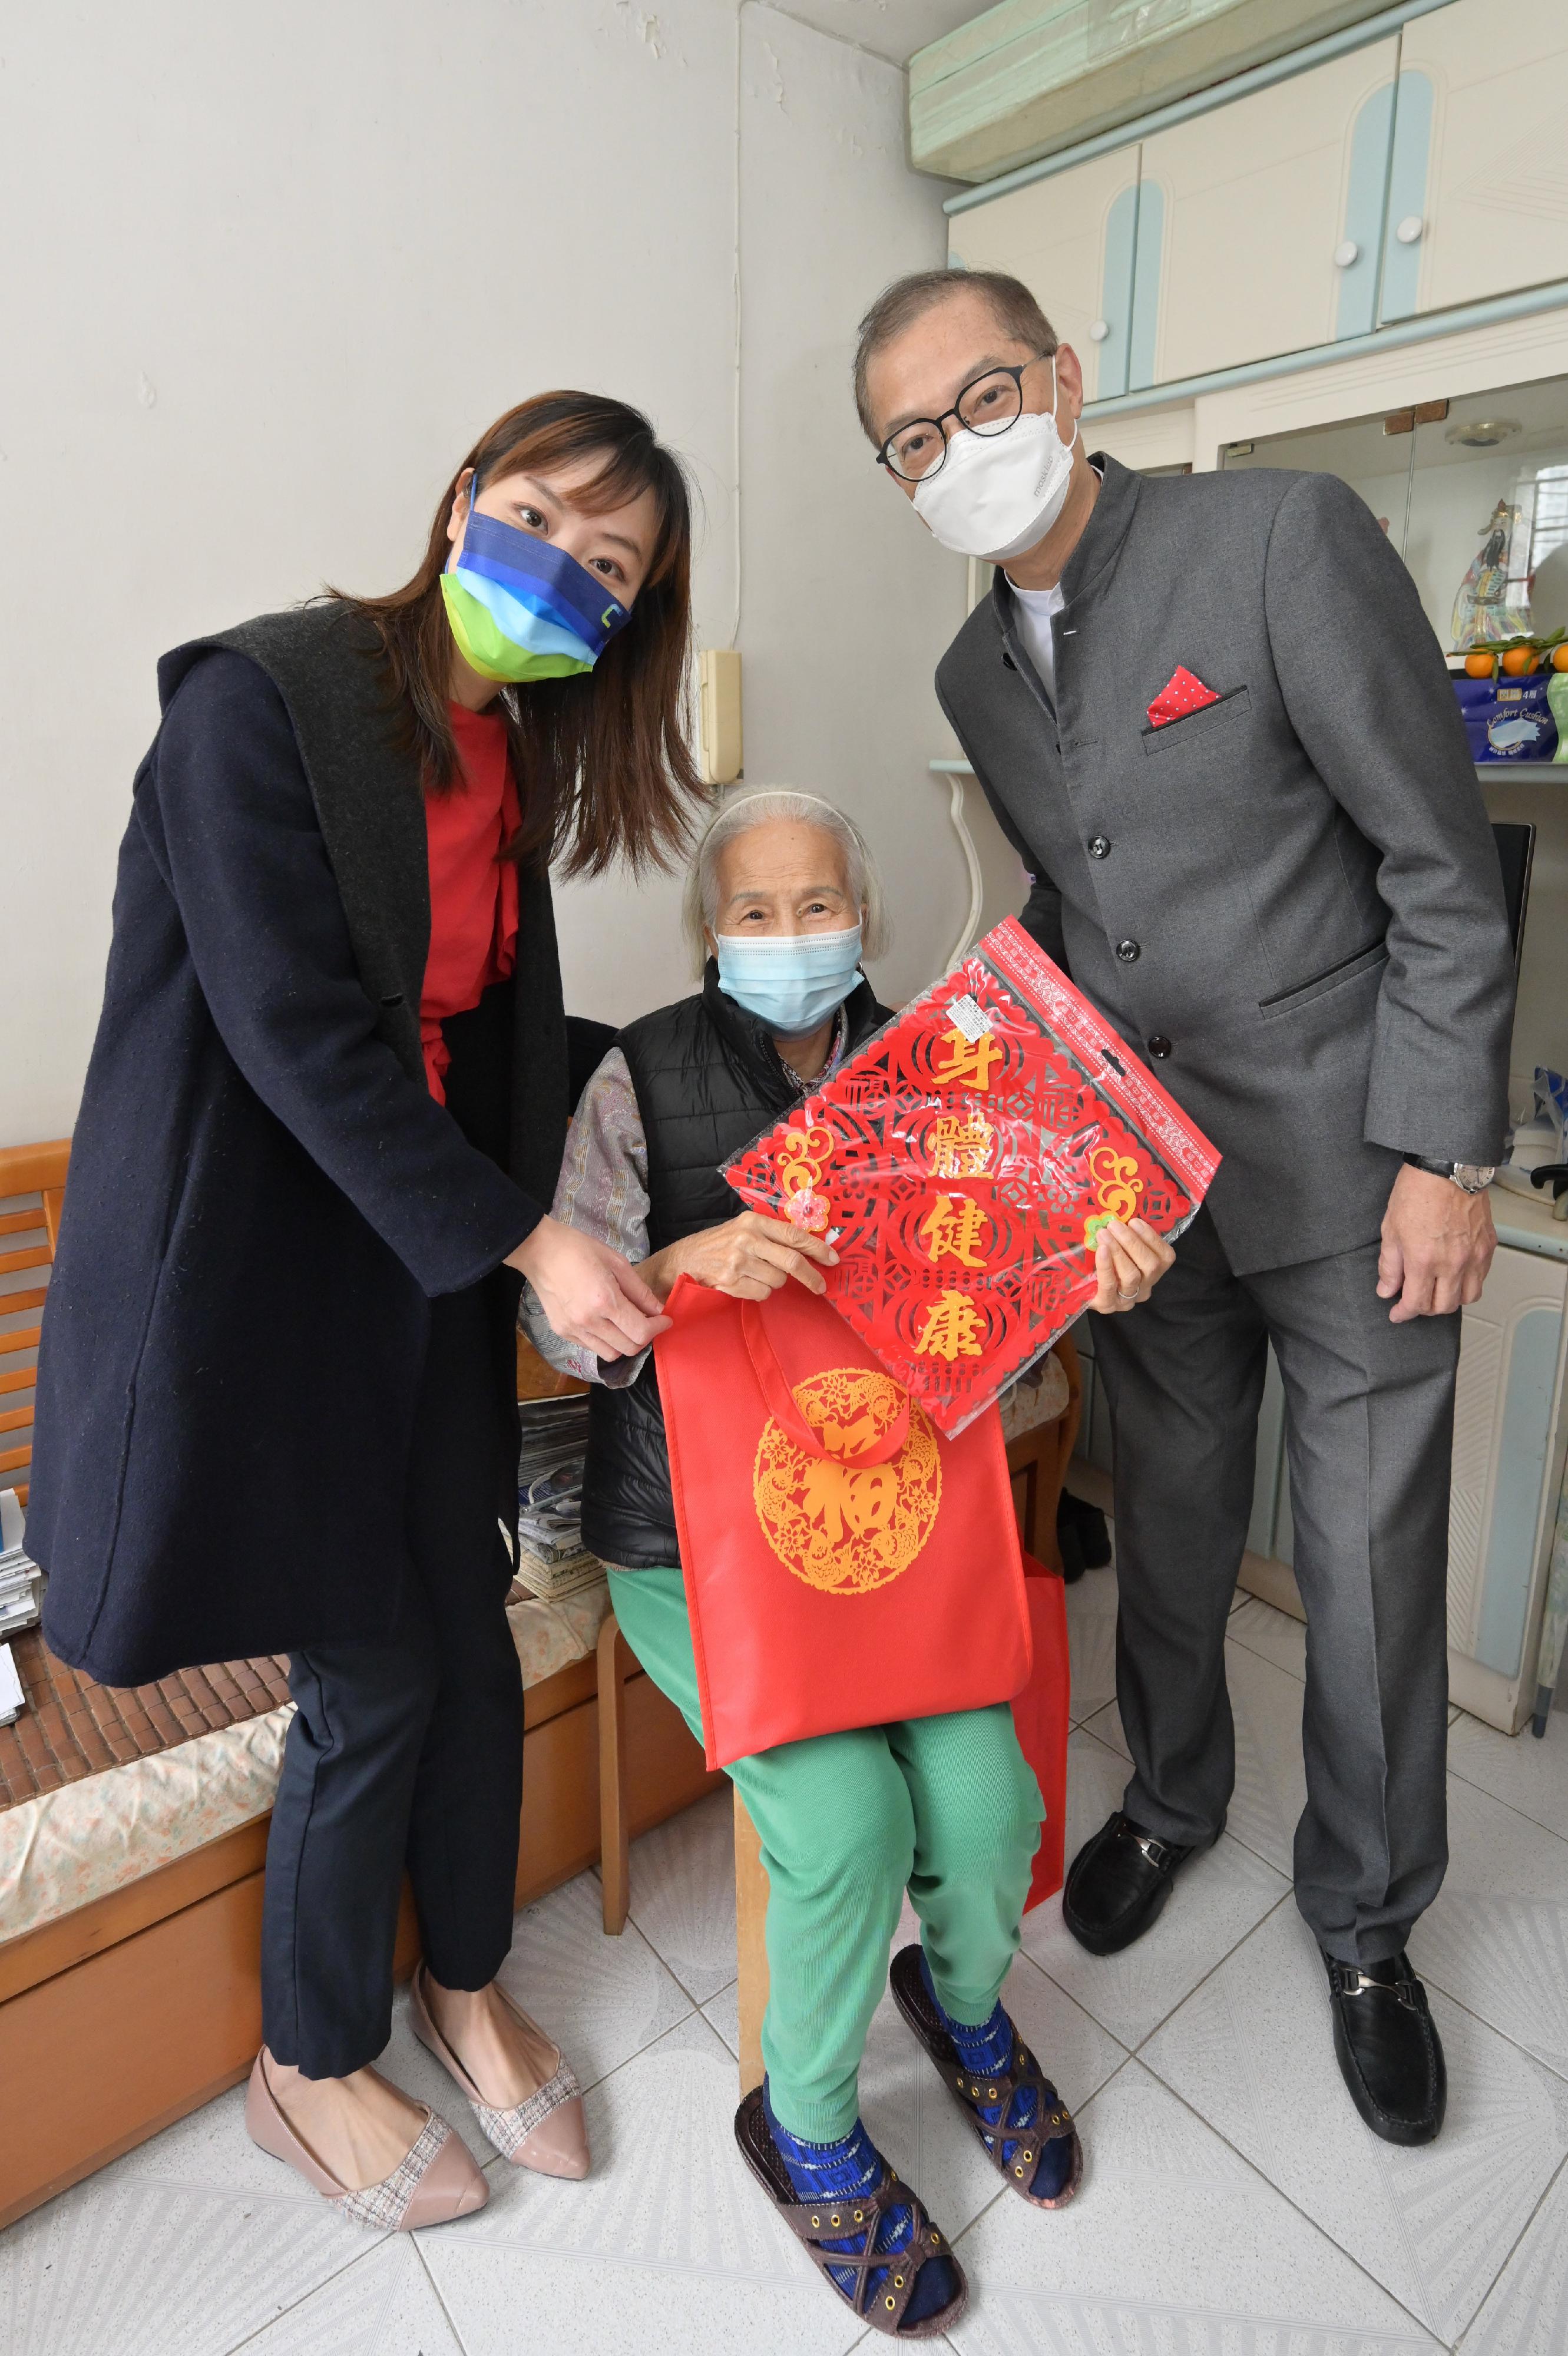 The Deputy Secretary for Justice, Mr Cheung Kwok-kwan, together with a number of the Principal Officials today (January 23) visited grass-roots families in Wong Tai Sin District to distribute blessing bags and celebrate Chinese New Year with them.  Photo shows the Secretary for Health, Professor Lo Chung-mau (right) and the Acting Secretary for Innovation, Technology and Industry, Ms Lillian Cheong (left) distributing blessing bag to a singleton to share with her the festive joy.